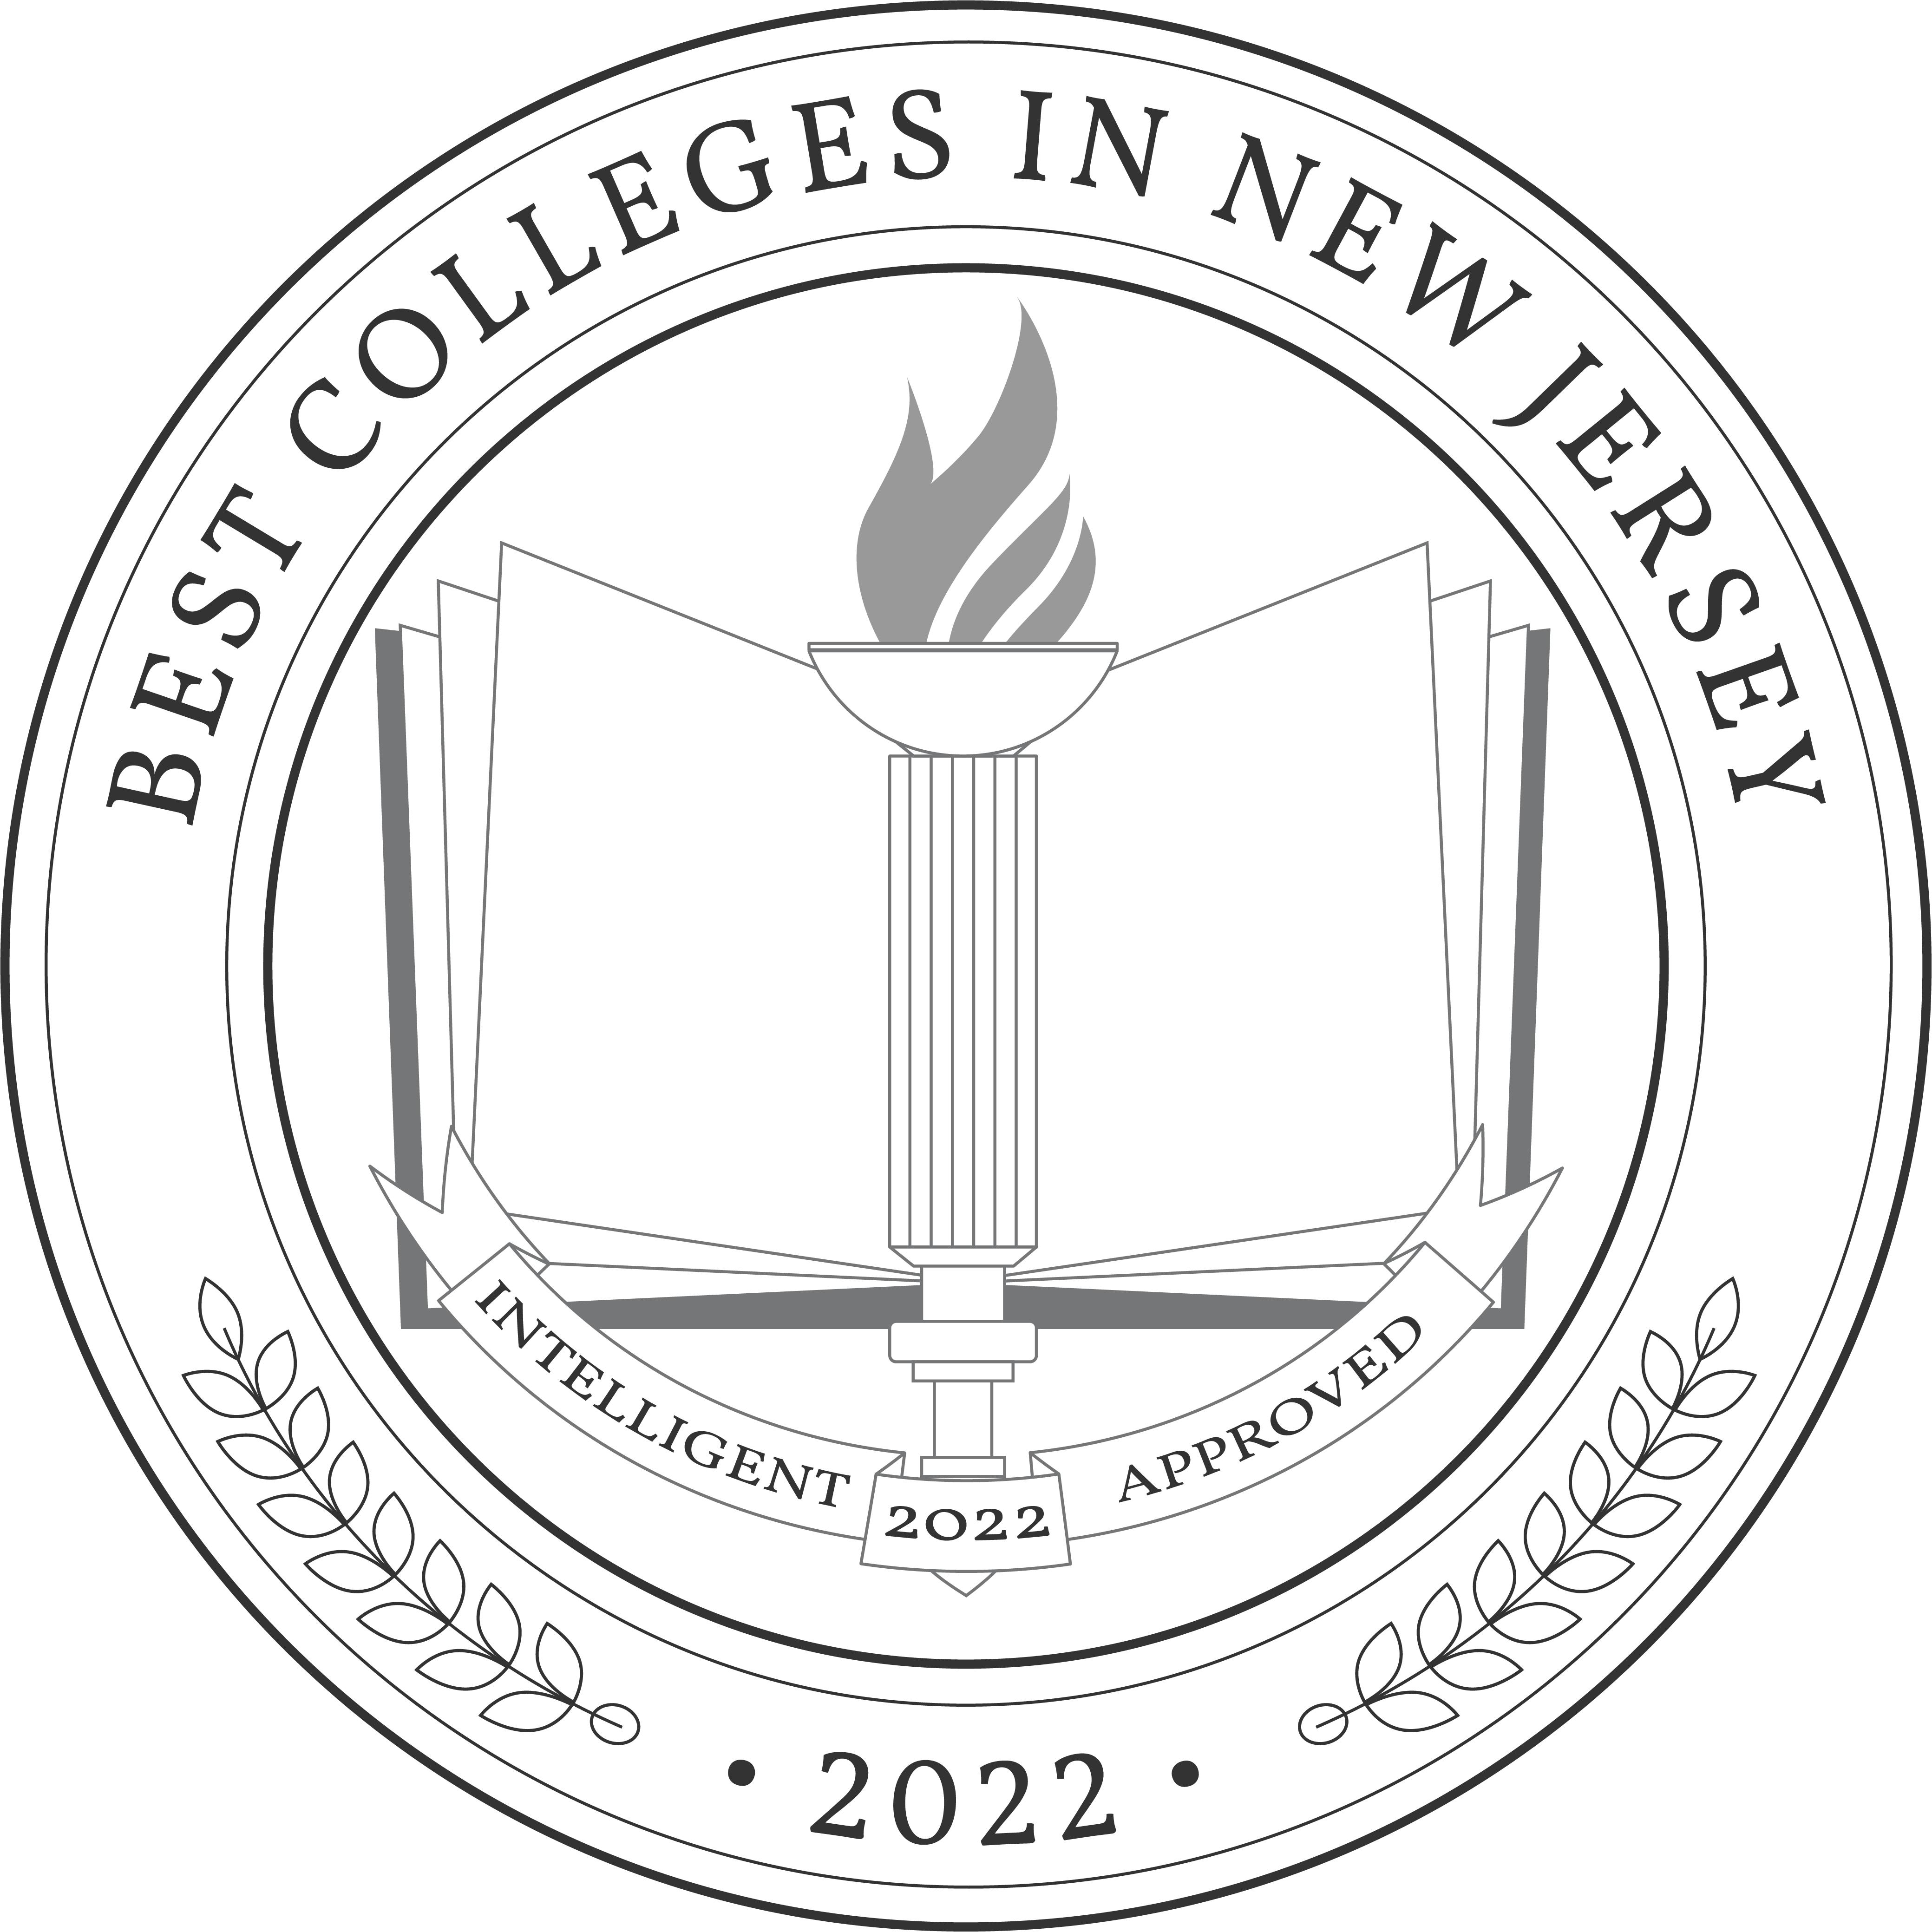 Best Colleges In New Jersey